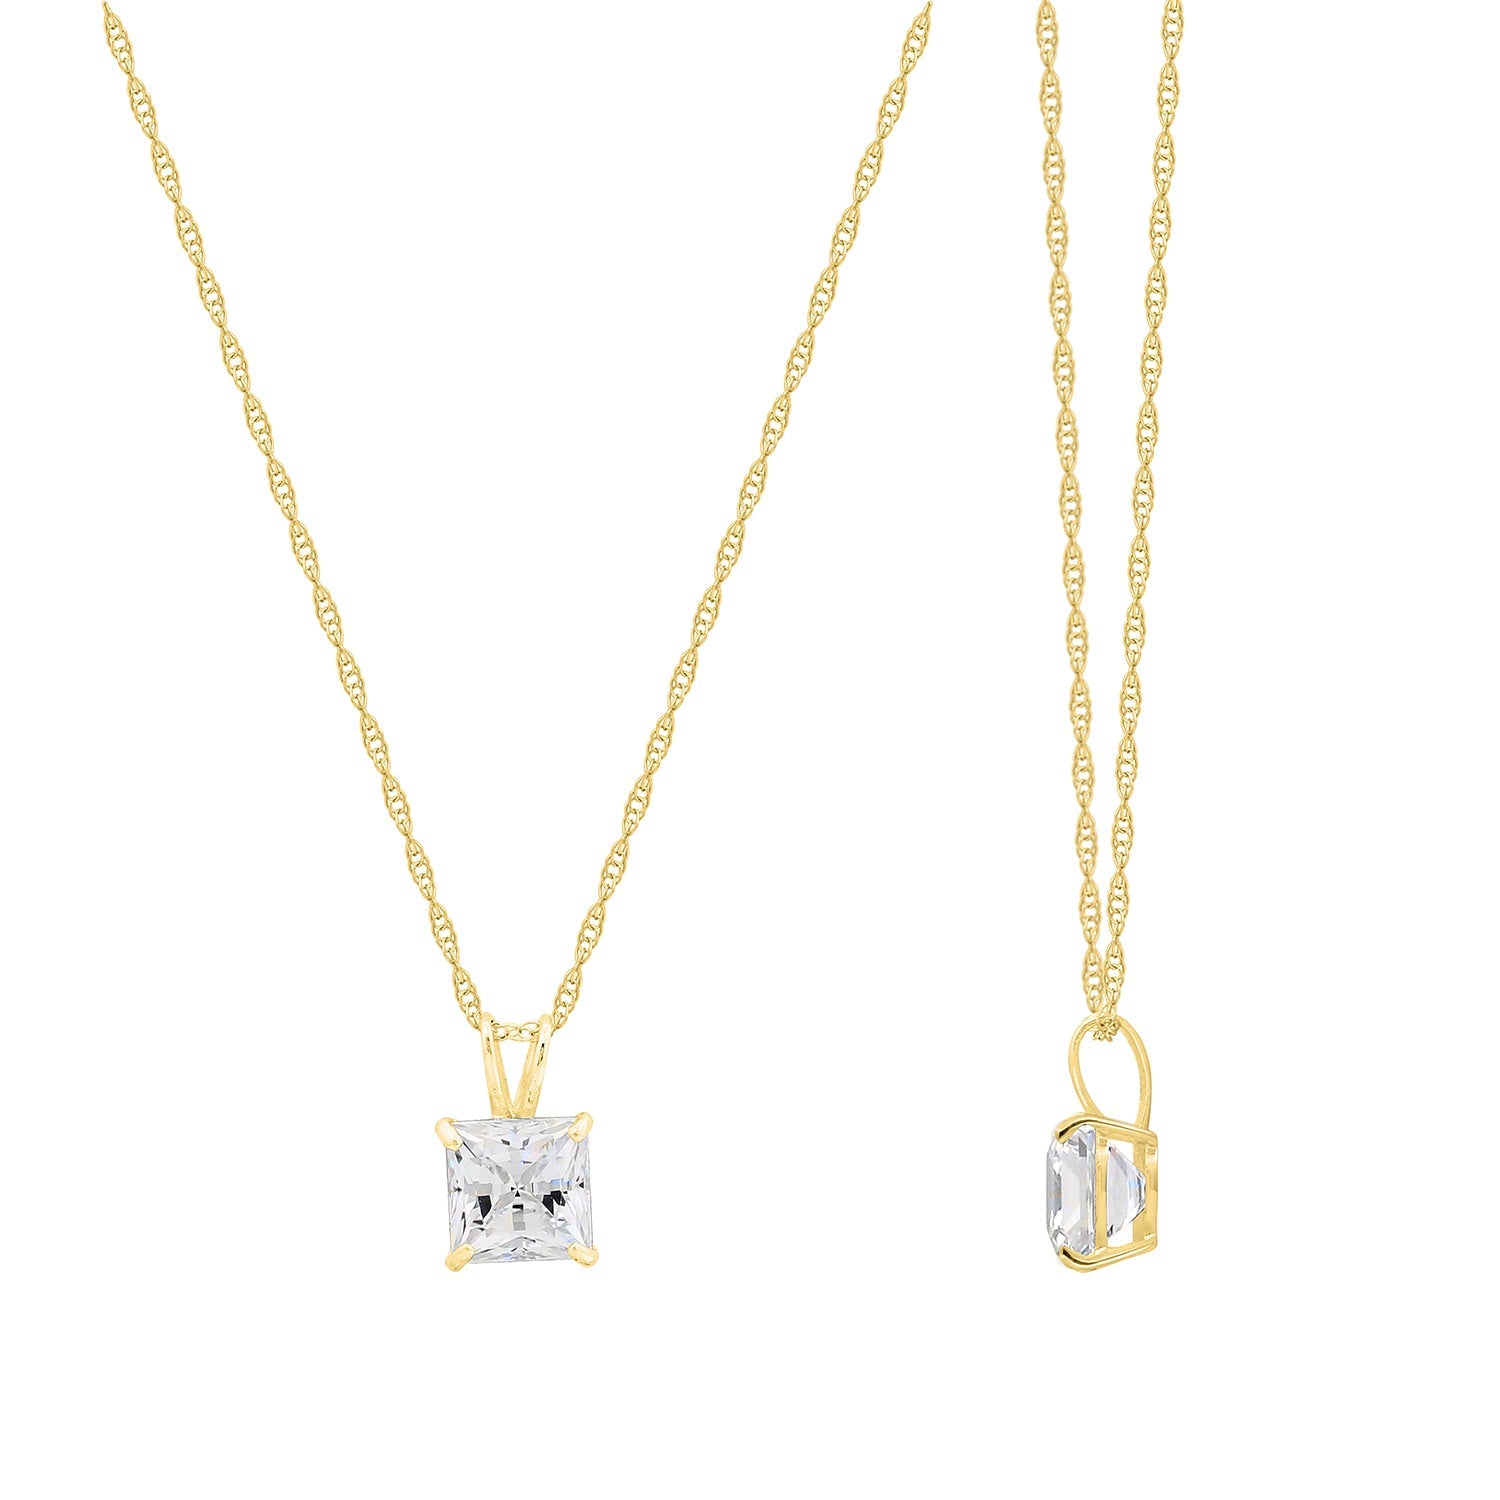 14K Gold 1cttw Zirconia Square Pendant with Chain